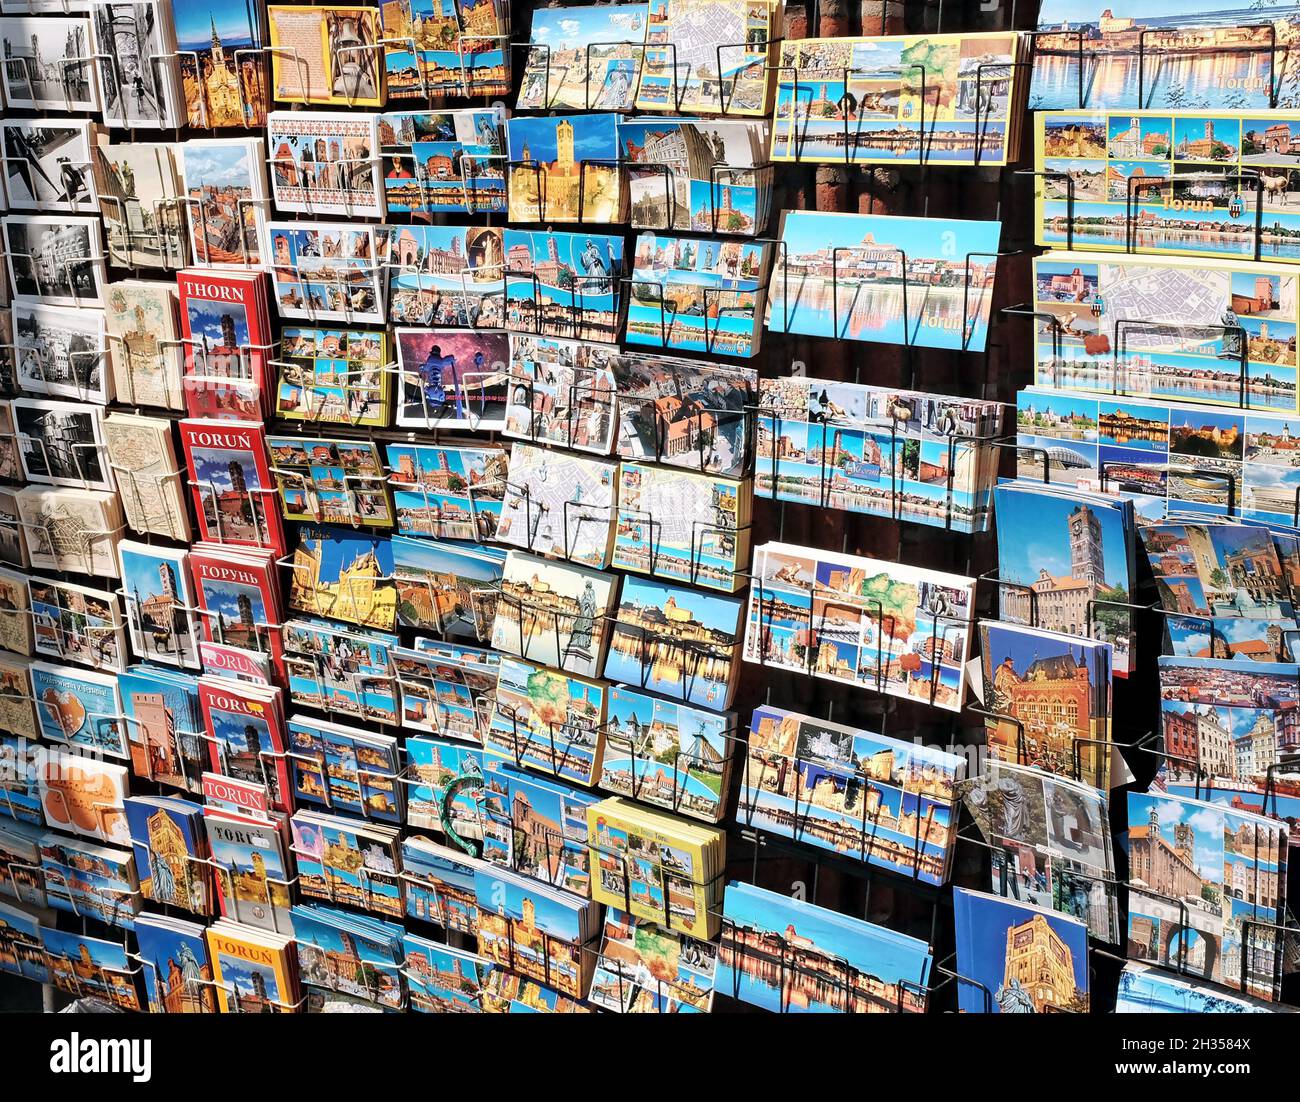 A display of tourist postcards and books in the old town of Torun, Poland. Stock Photo